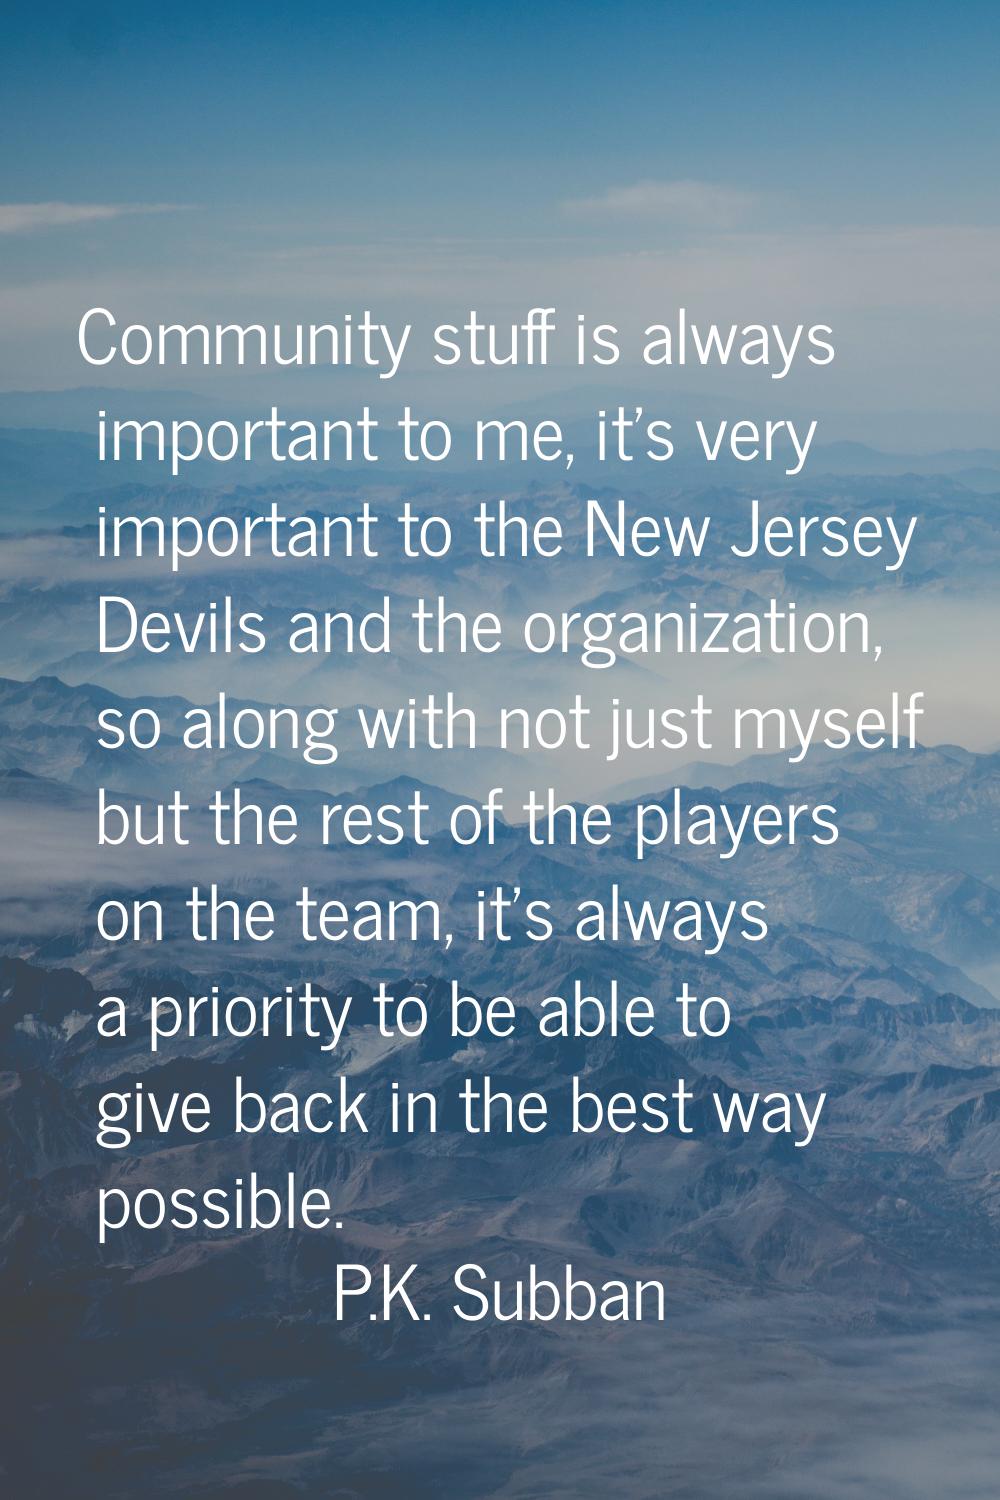 Community stuff is always important to me, it's very important to the New Jersey Devils and the org